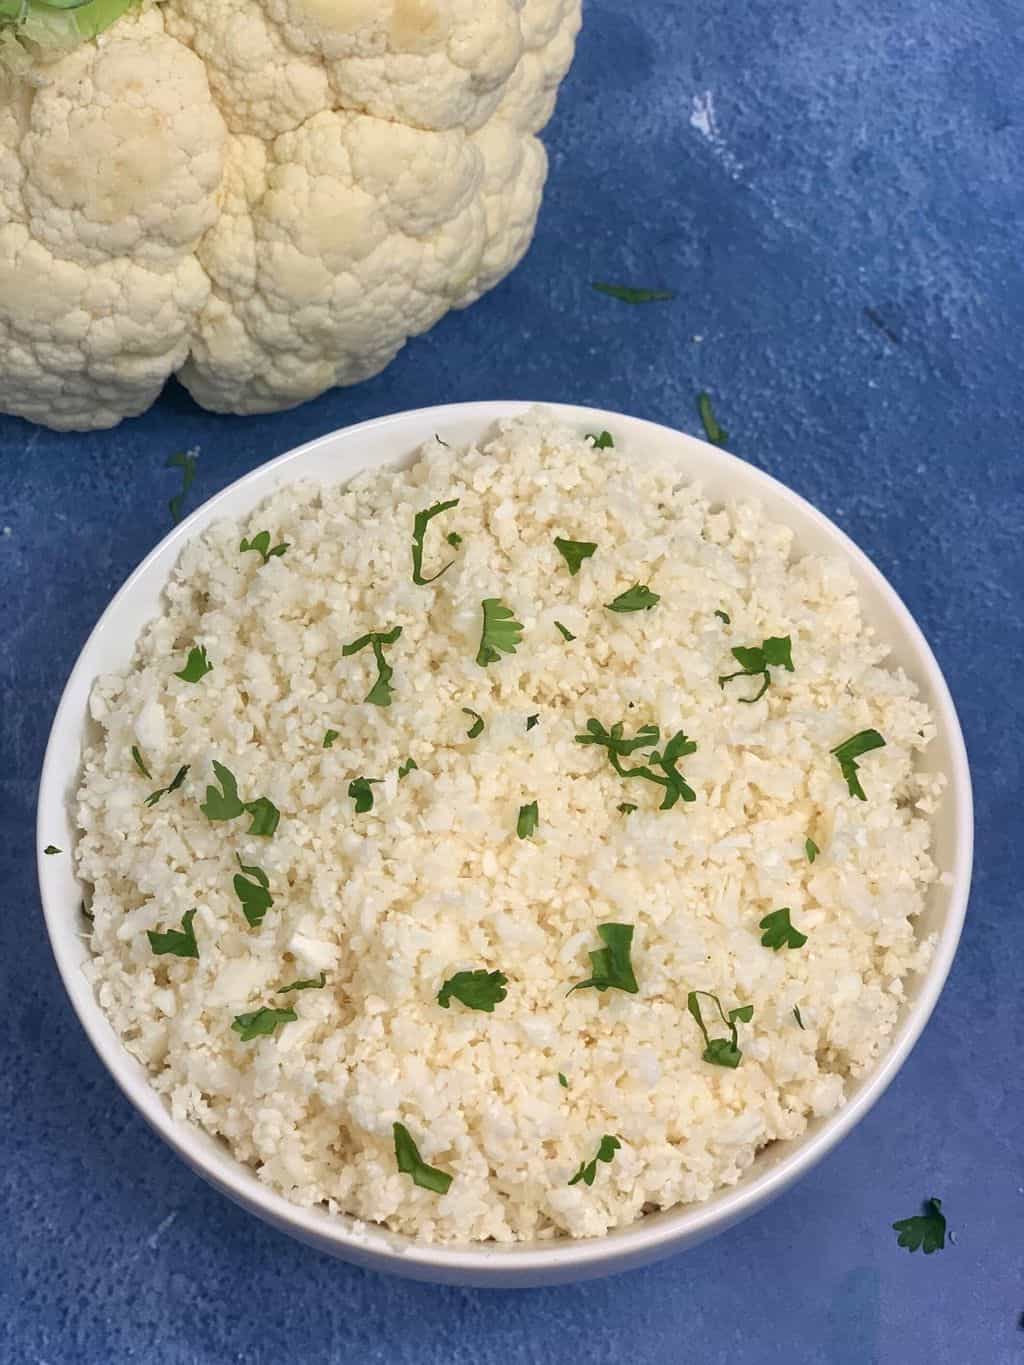 cauliflower rice served in a bowl garnished with cilantro and whole cauliflower on the side